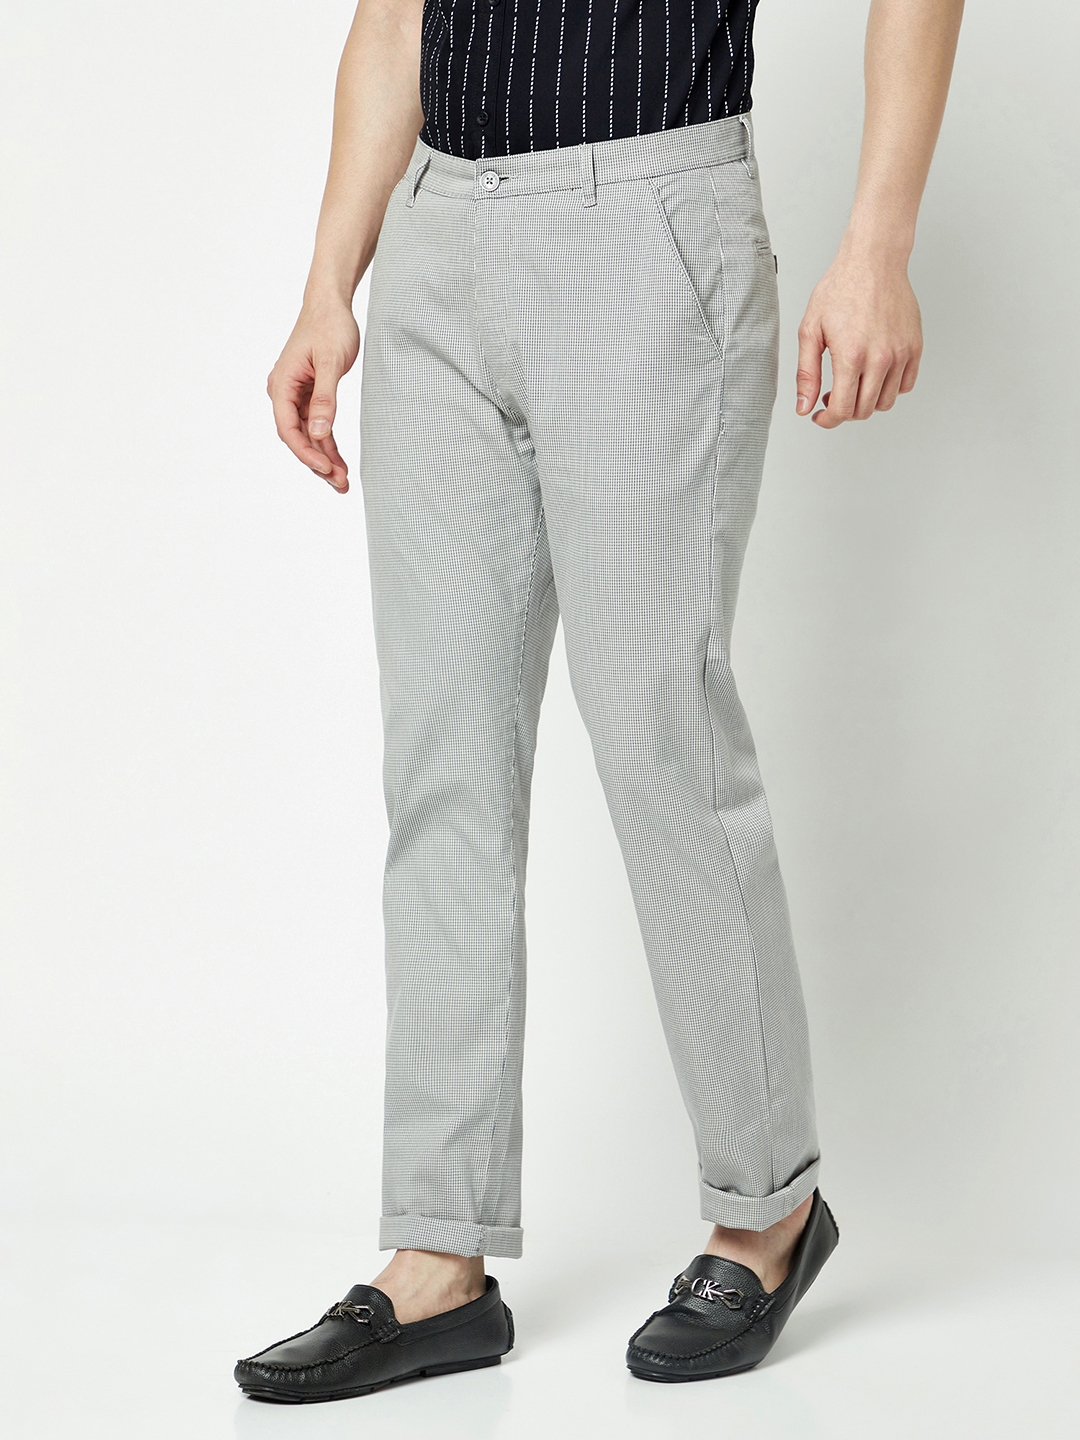 Formal Trouser Grey Color Fabric Solid  CANOE TRENDS